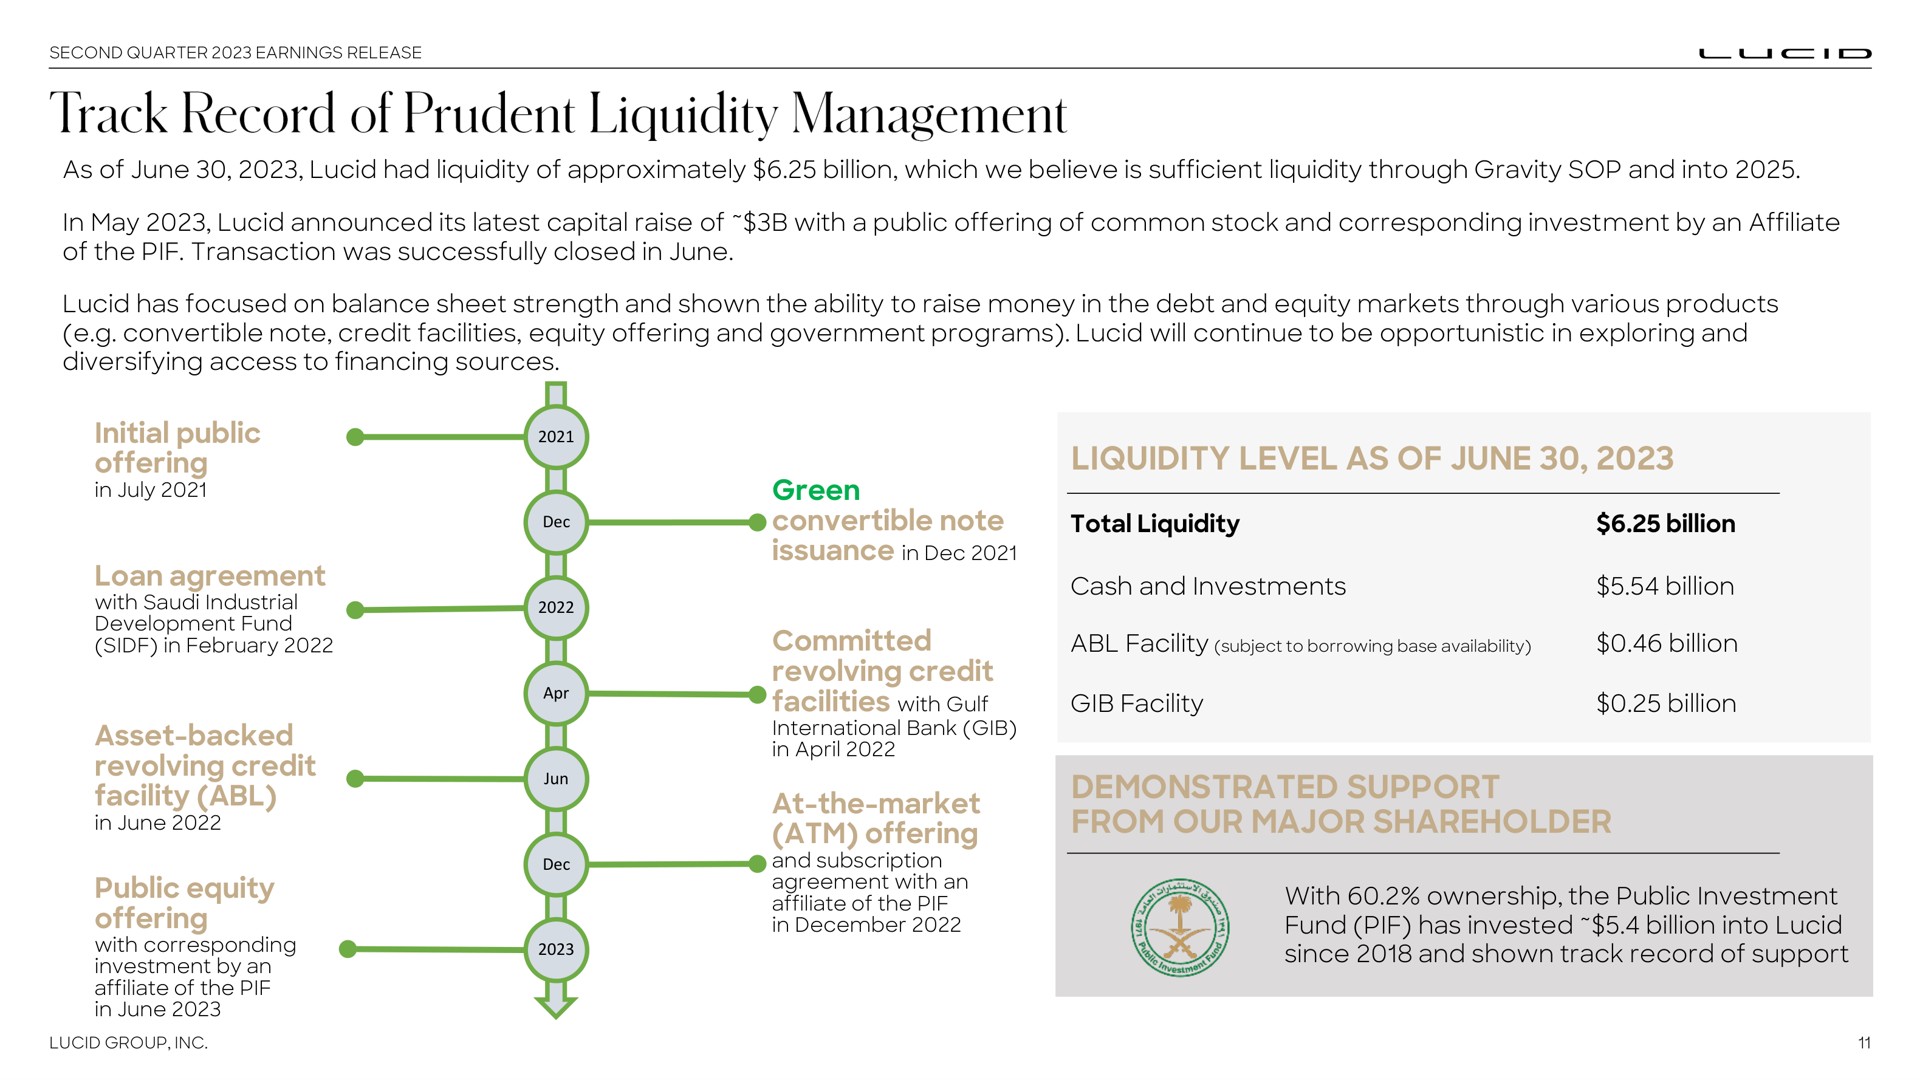 as of june lucid had liquidity of approximately billion which we believe is sufficient liquidity through gravity sop and into in may lucid announced its latest capital raise of with a public offering of common stock and corresponding investment by an affiliate of the transaction was successfully closed in june lucid has focused on balance sheet strength and shown the ability to raise money in the debt and equity markets through various products convertible note credit facilities equity offering and government programs lucid will continue to be opportunistic in exploring and diversifying access to financing sources initial public offering in loan agreement with industrial development fund in asset backed revolving credit facility in june public equity offering with corresponding investment by an affiliate of the in june green convertible note issuance in committed revolving credit facilities with gulf international bank gib in at the market offering and subscription agreement with an affiliate of the in liquidity level as of june total liquidity cash and investments billion billion billion gib facility billion demonstrated support from our major shareholder with ownership the public investment fund has invested billion into lucid since and shown track record of support prudent management | Lucid Motors